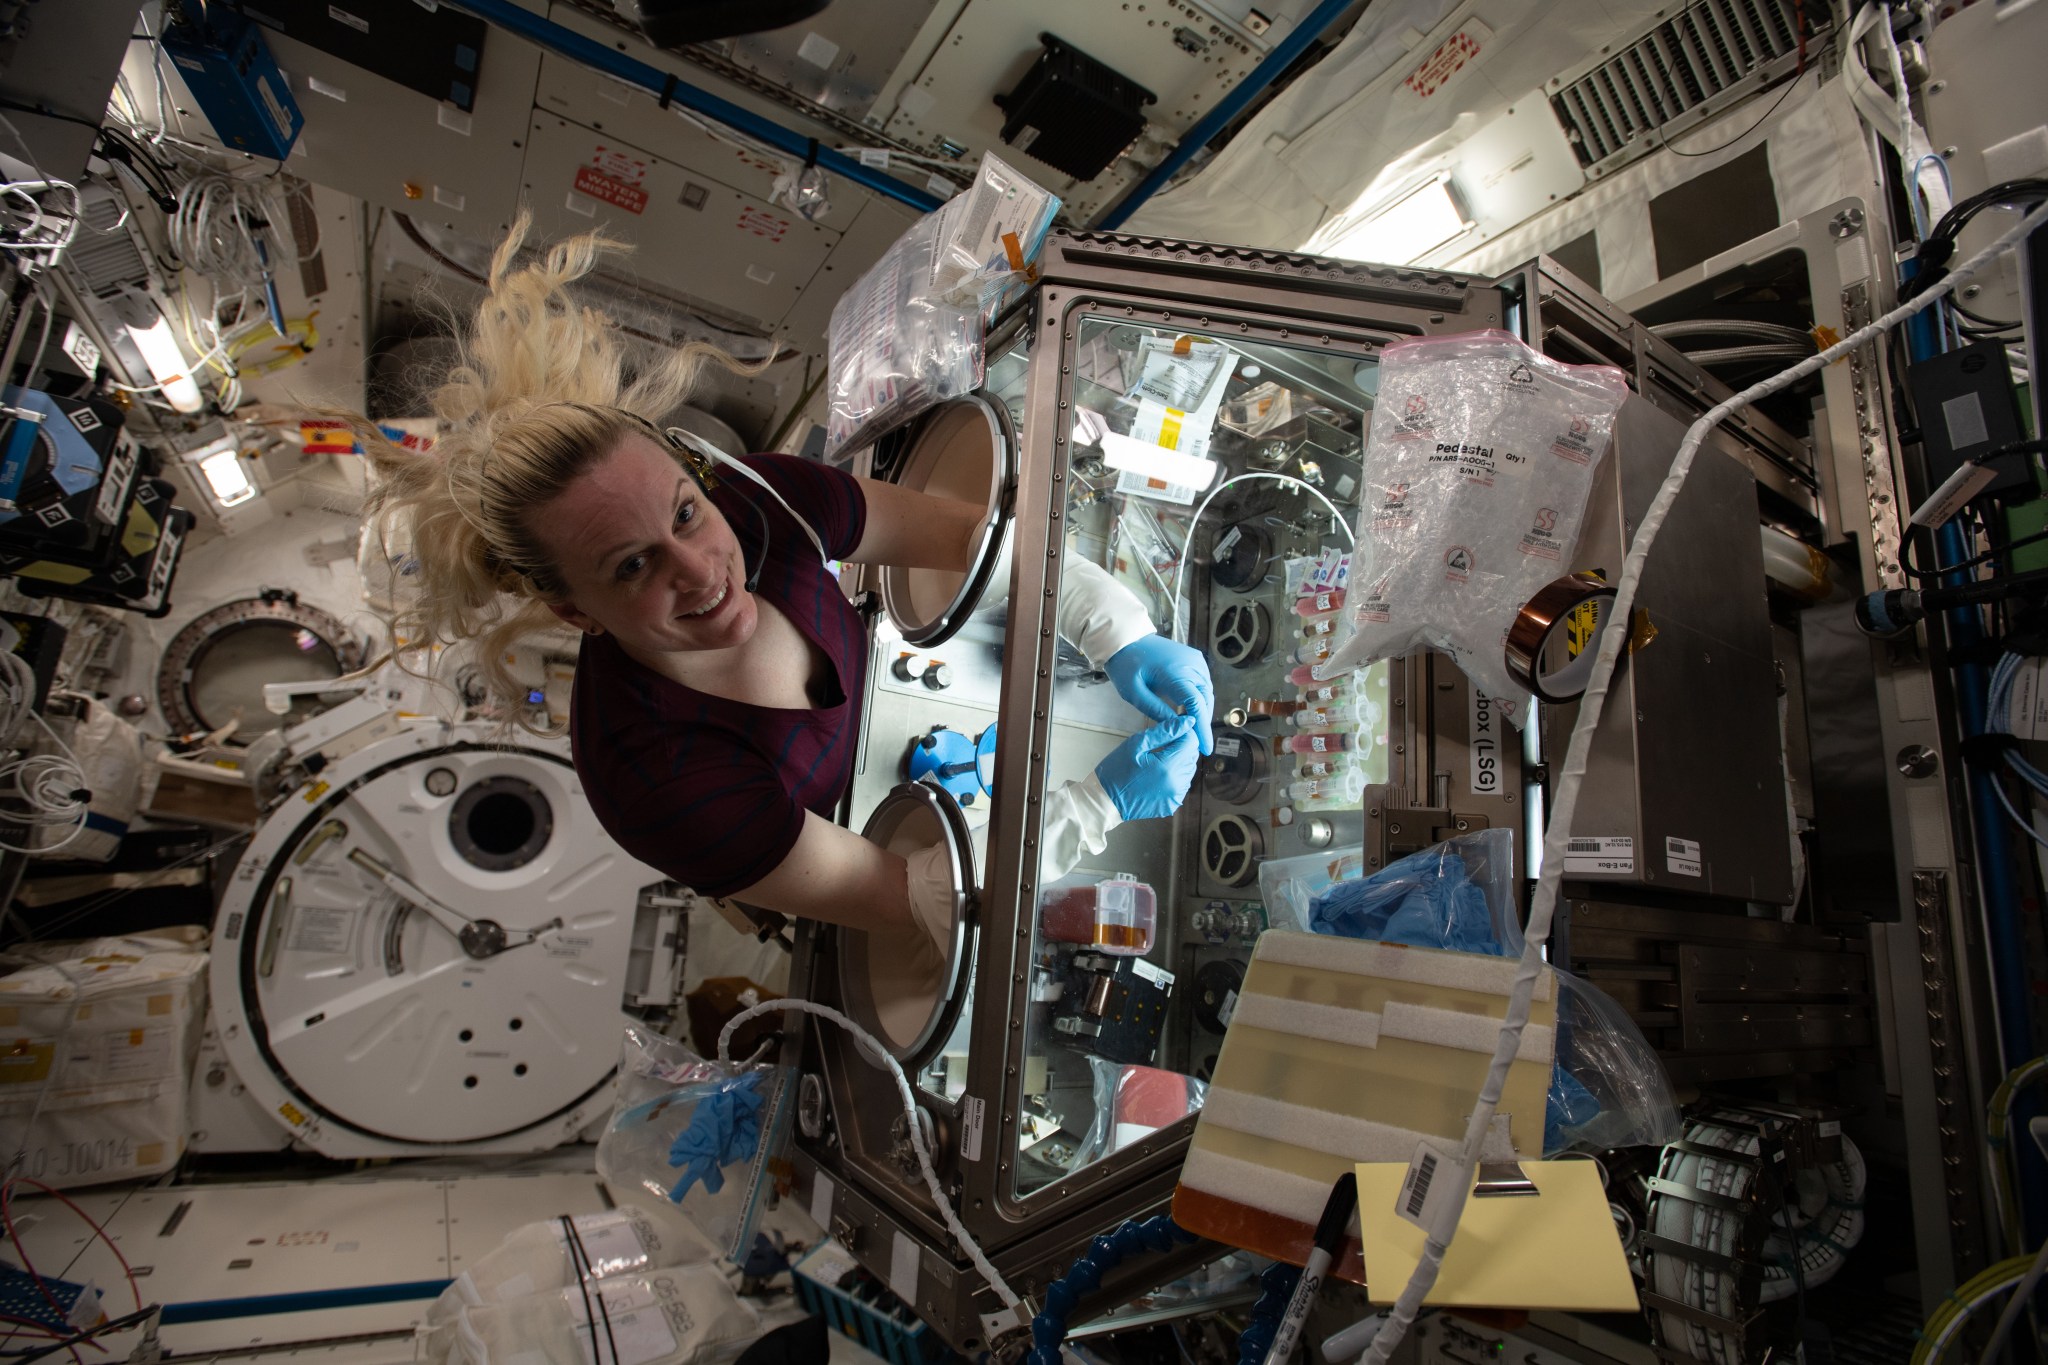 NASA astronaut and Expedition 64 Flight Engineer Kate Rubins works inside the Life Sciences Glovebox conducting research